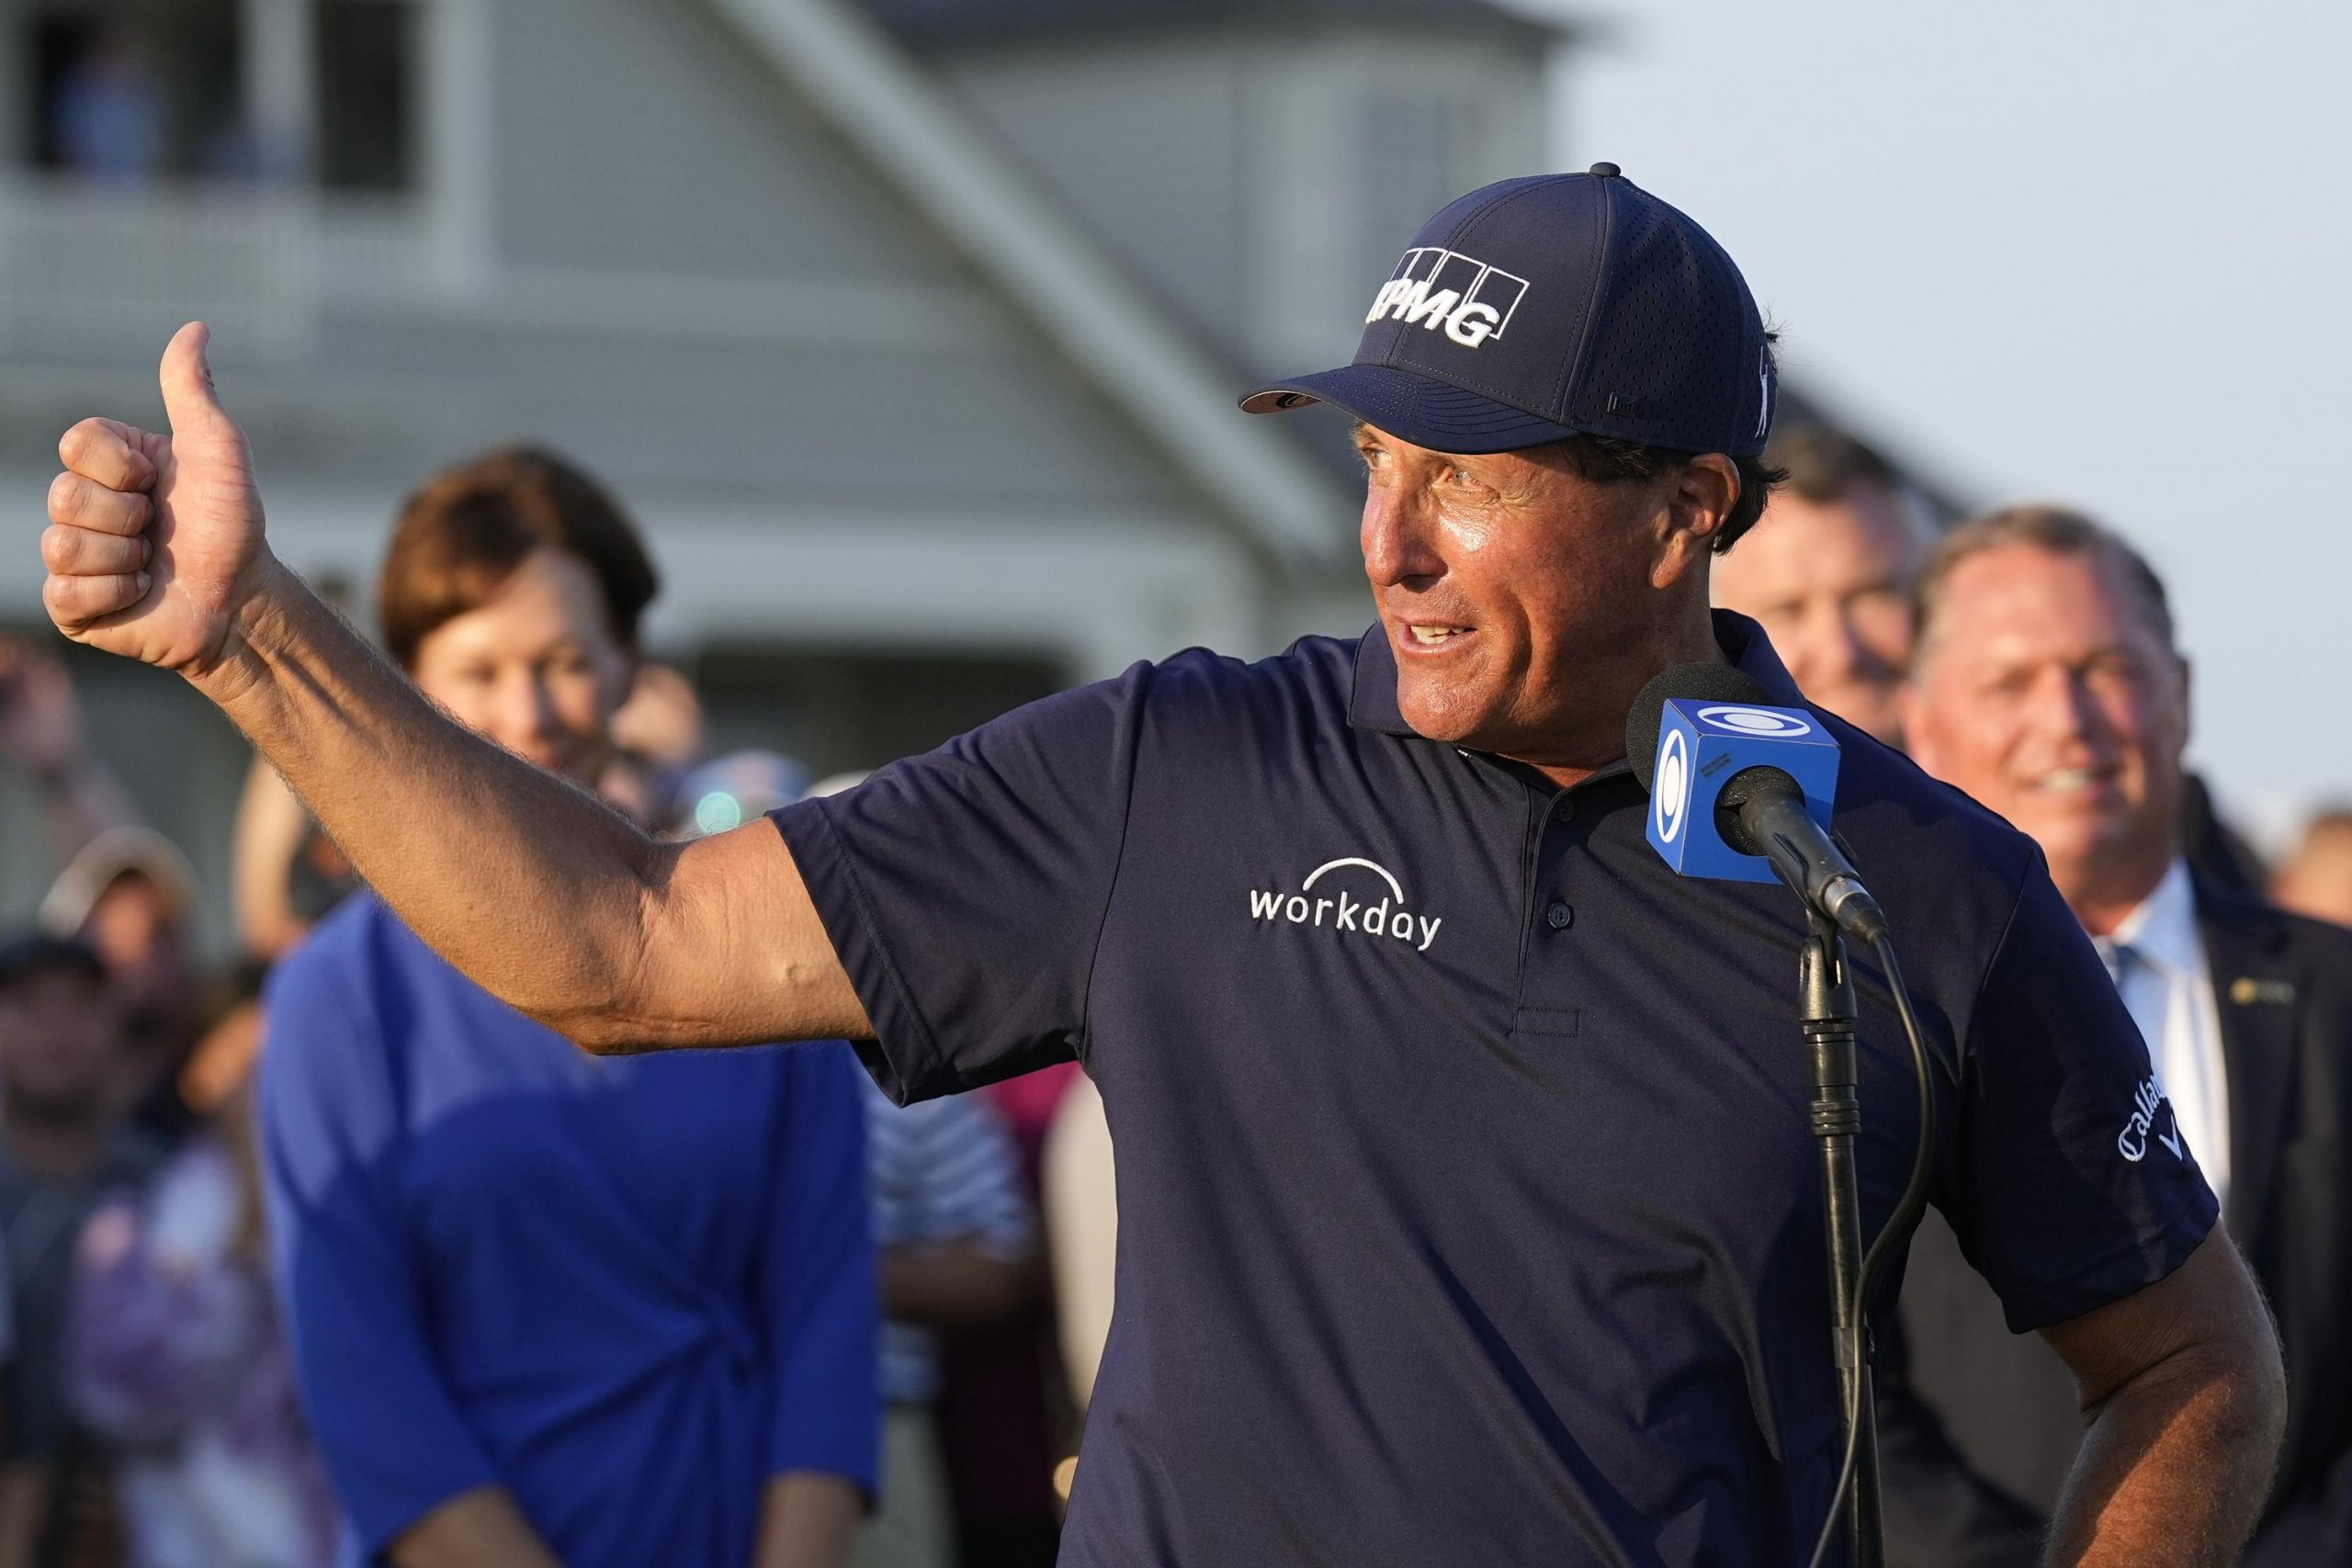 Mickelson decides not to defend title at PGA Championship